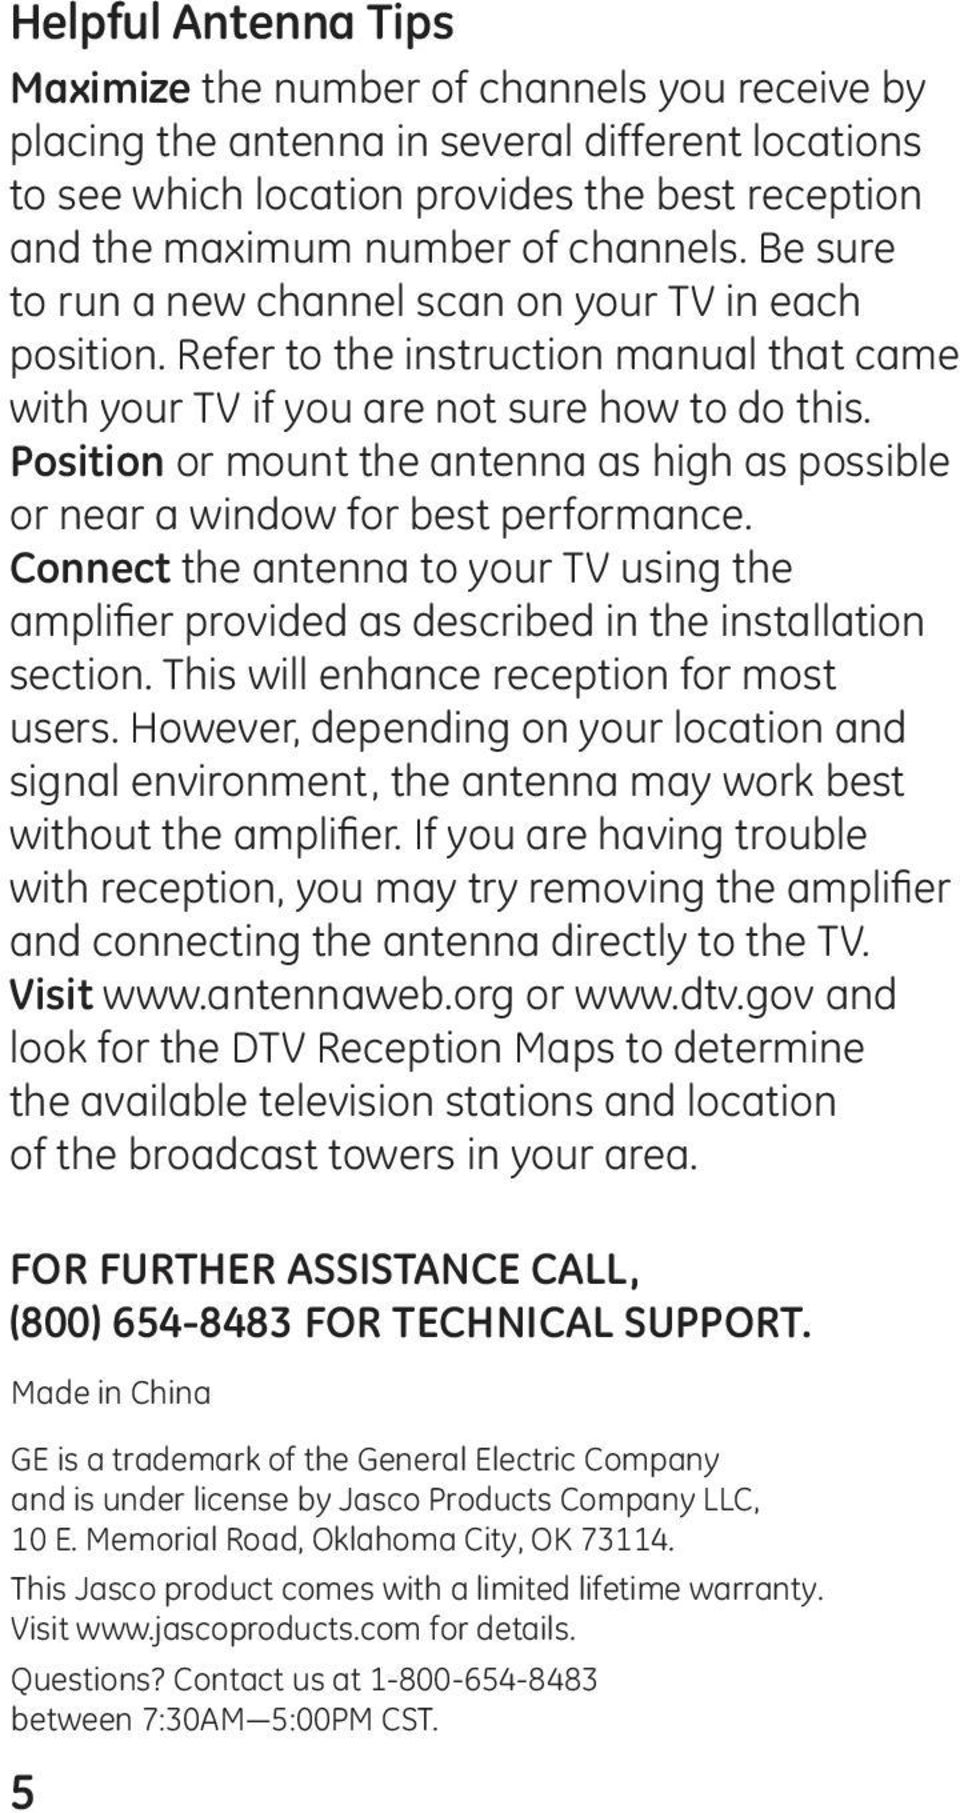 Position or mount the antenna as high as possible or near a window for best performance. Connect the antenna to your TV using the amplifier provided as described in the installation section.